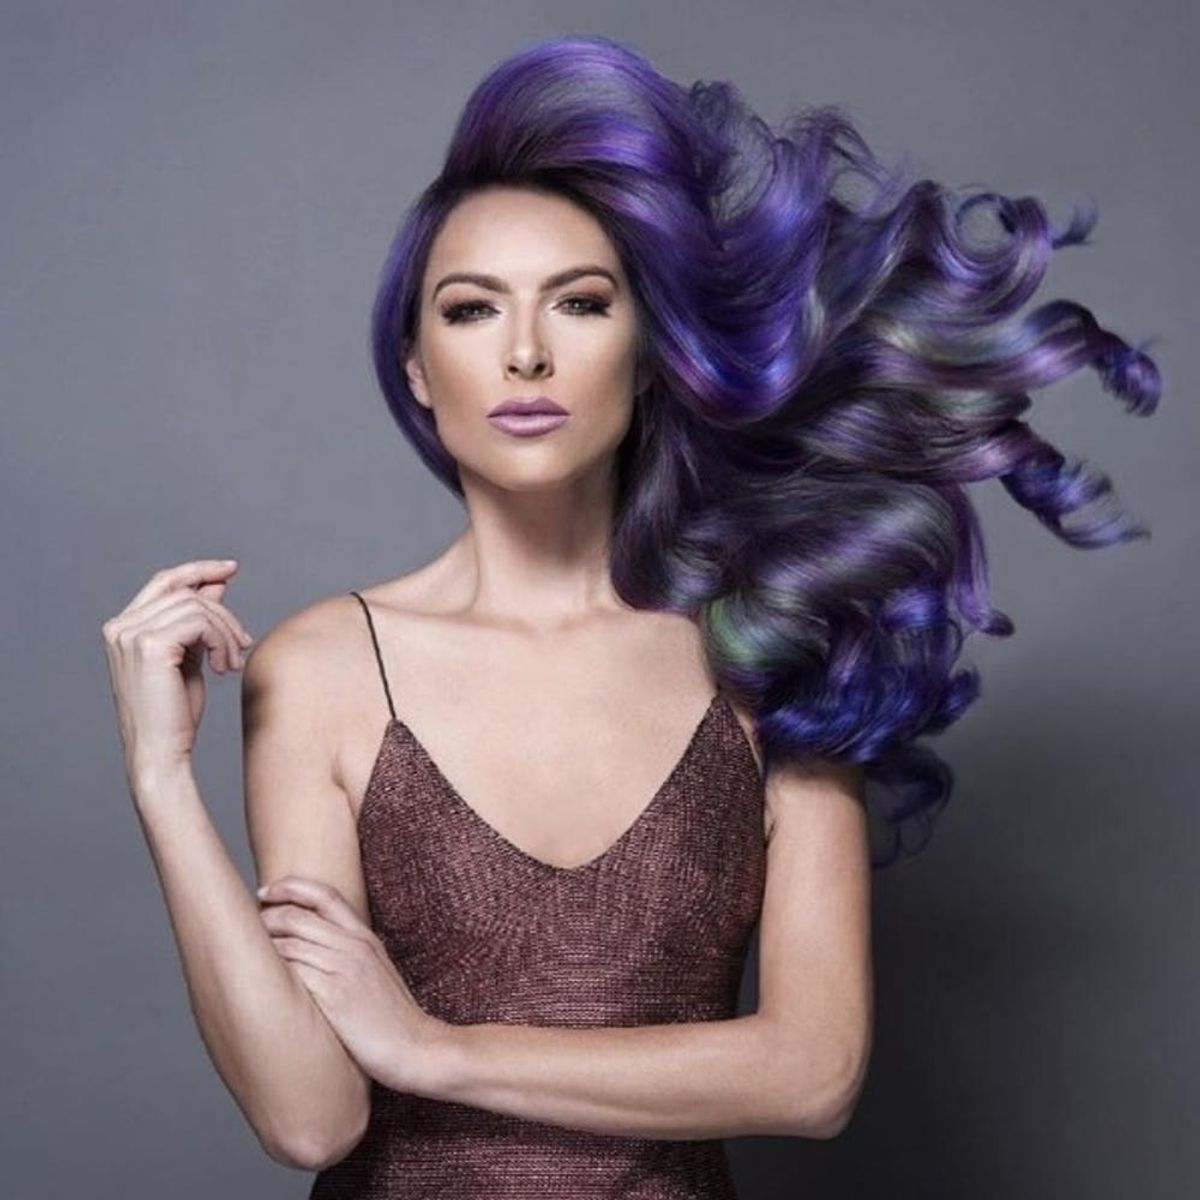 Jewel Tone Is the Stunning Rainbow Hair Trend for Brunettes